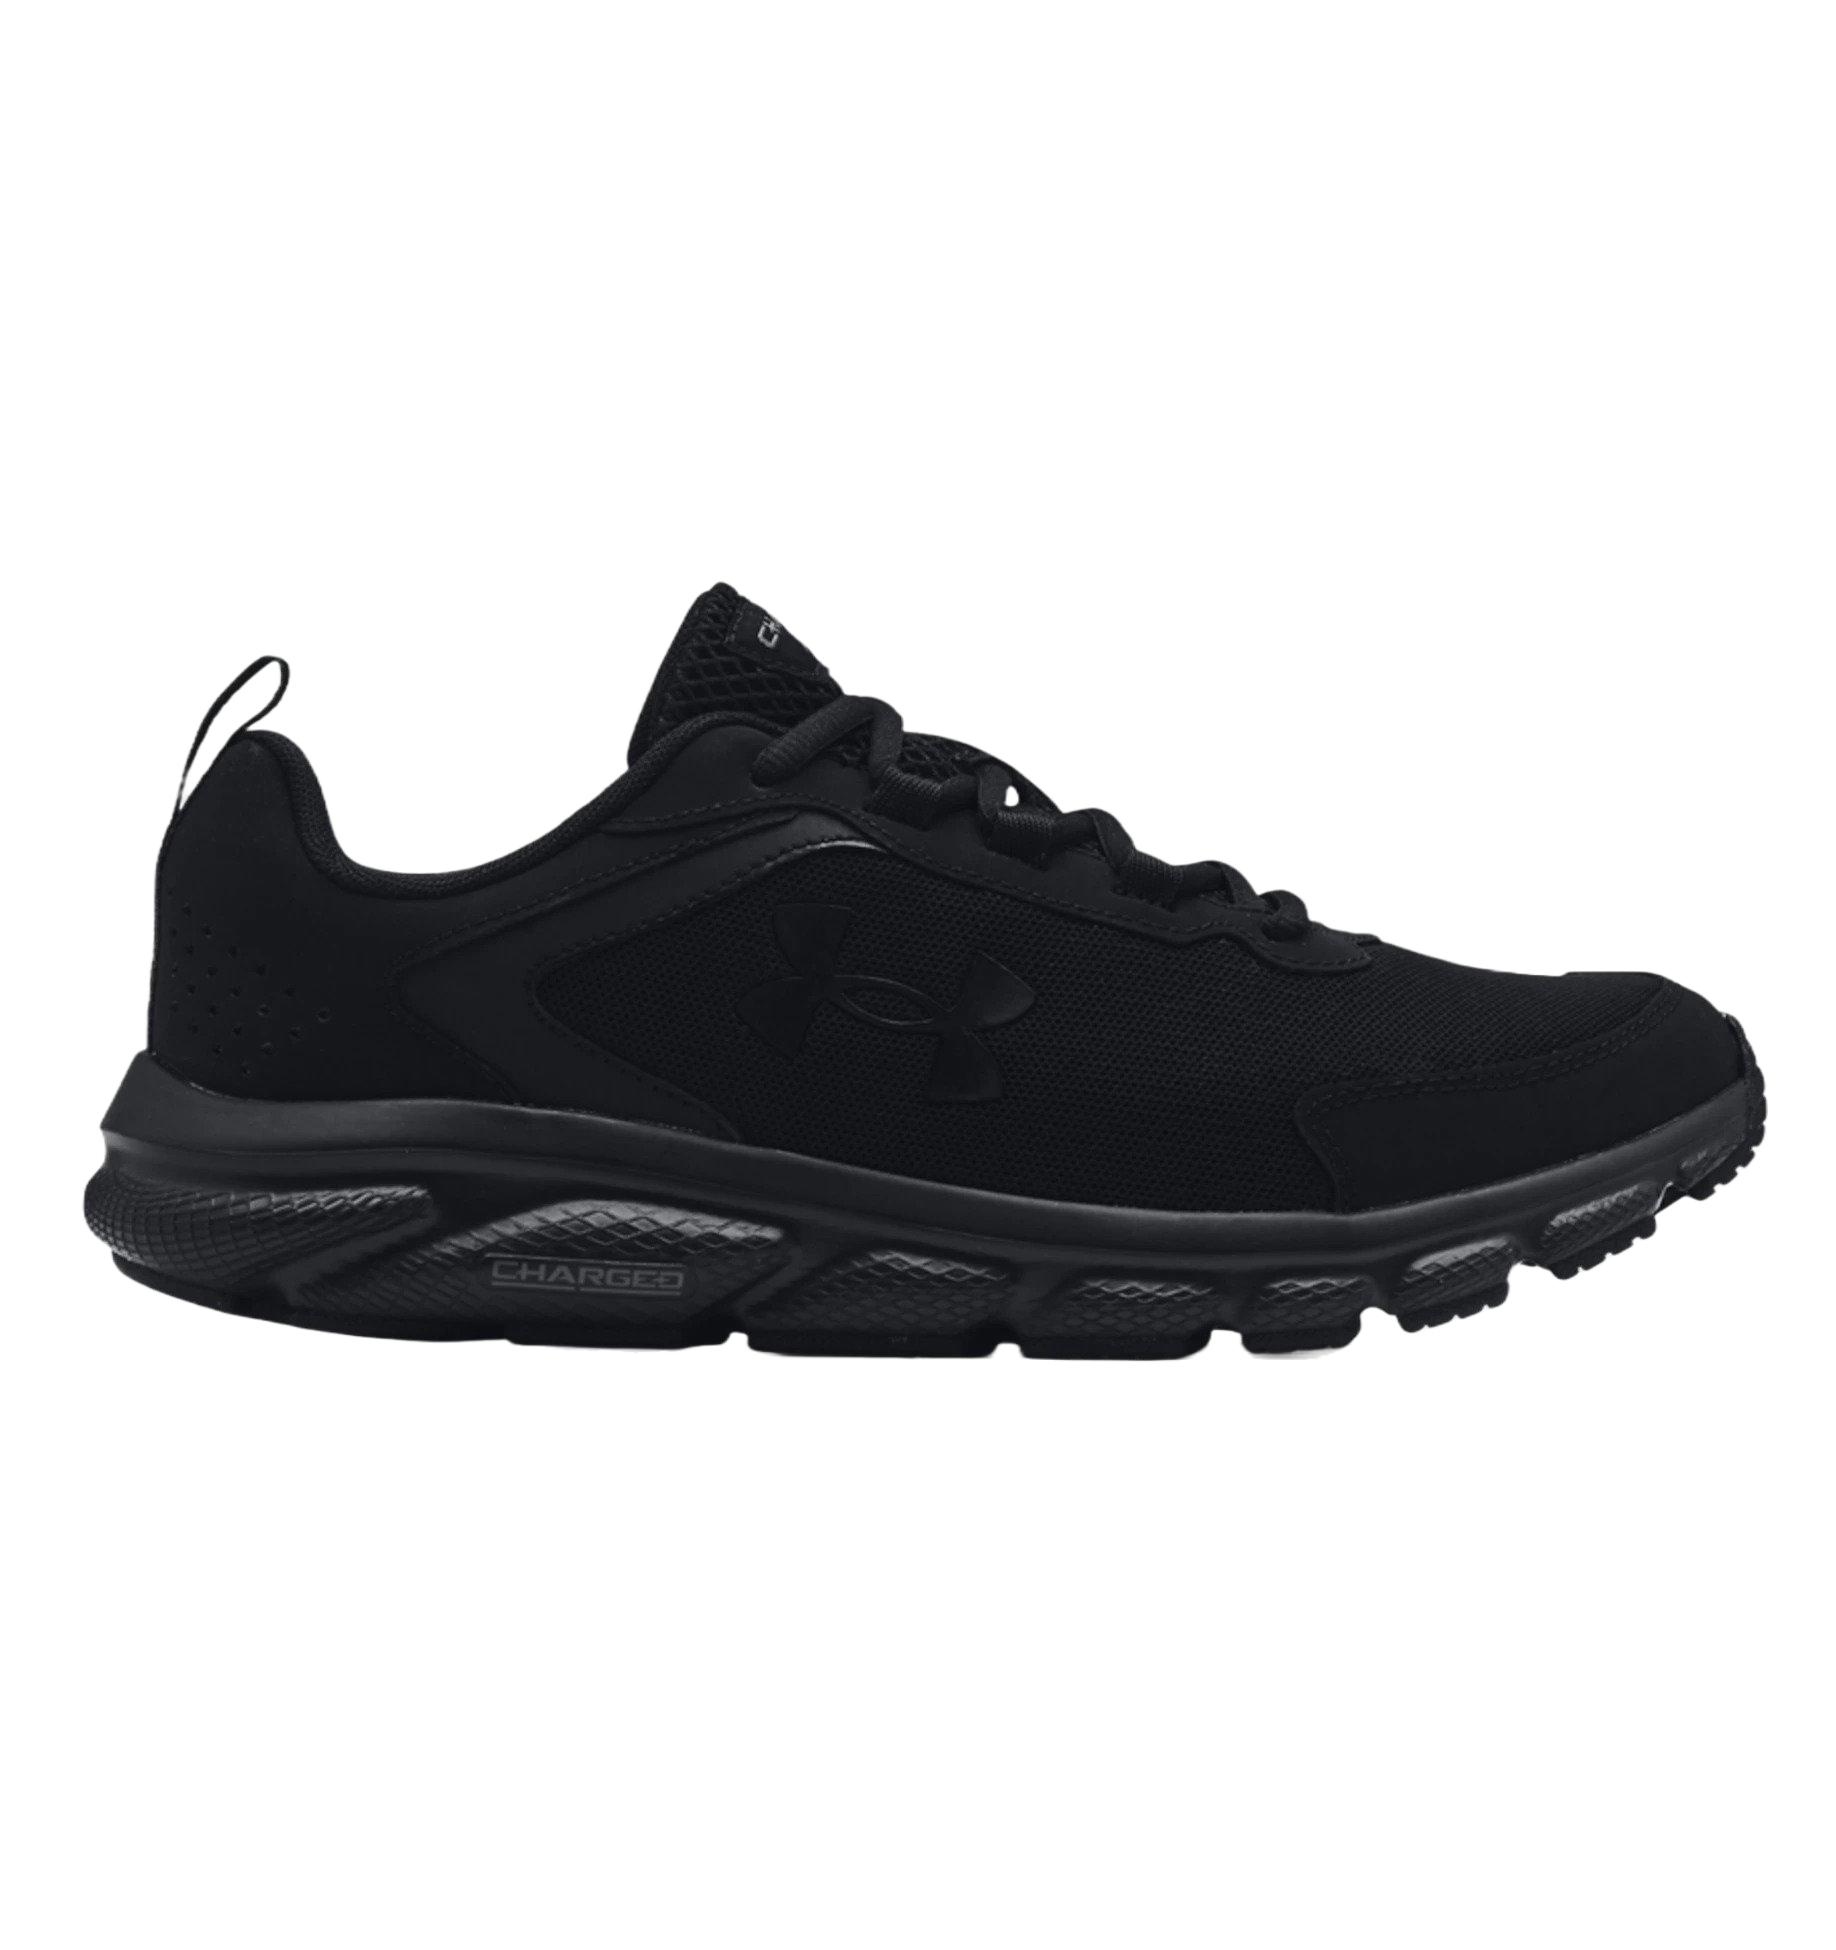 Under Armour Charged Assert 9 - Mens